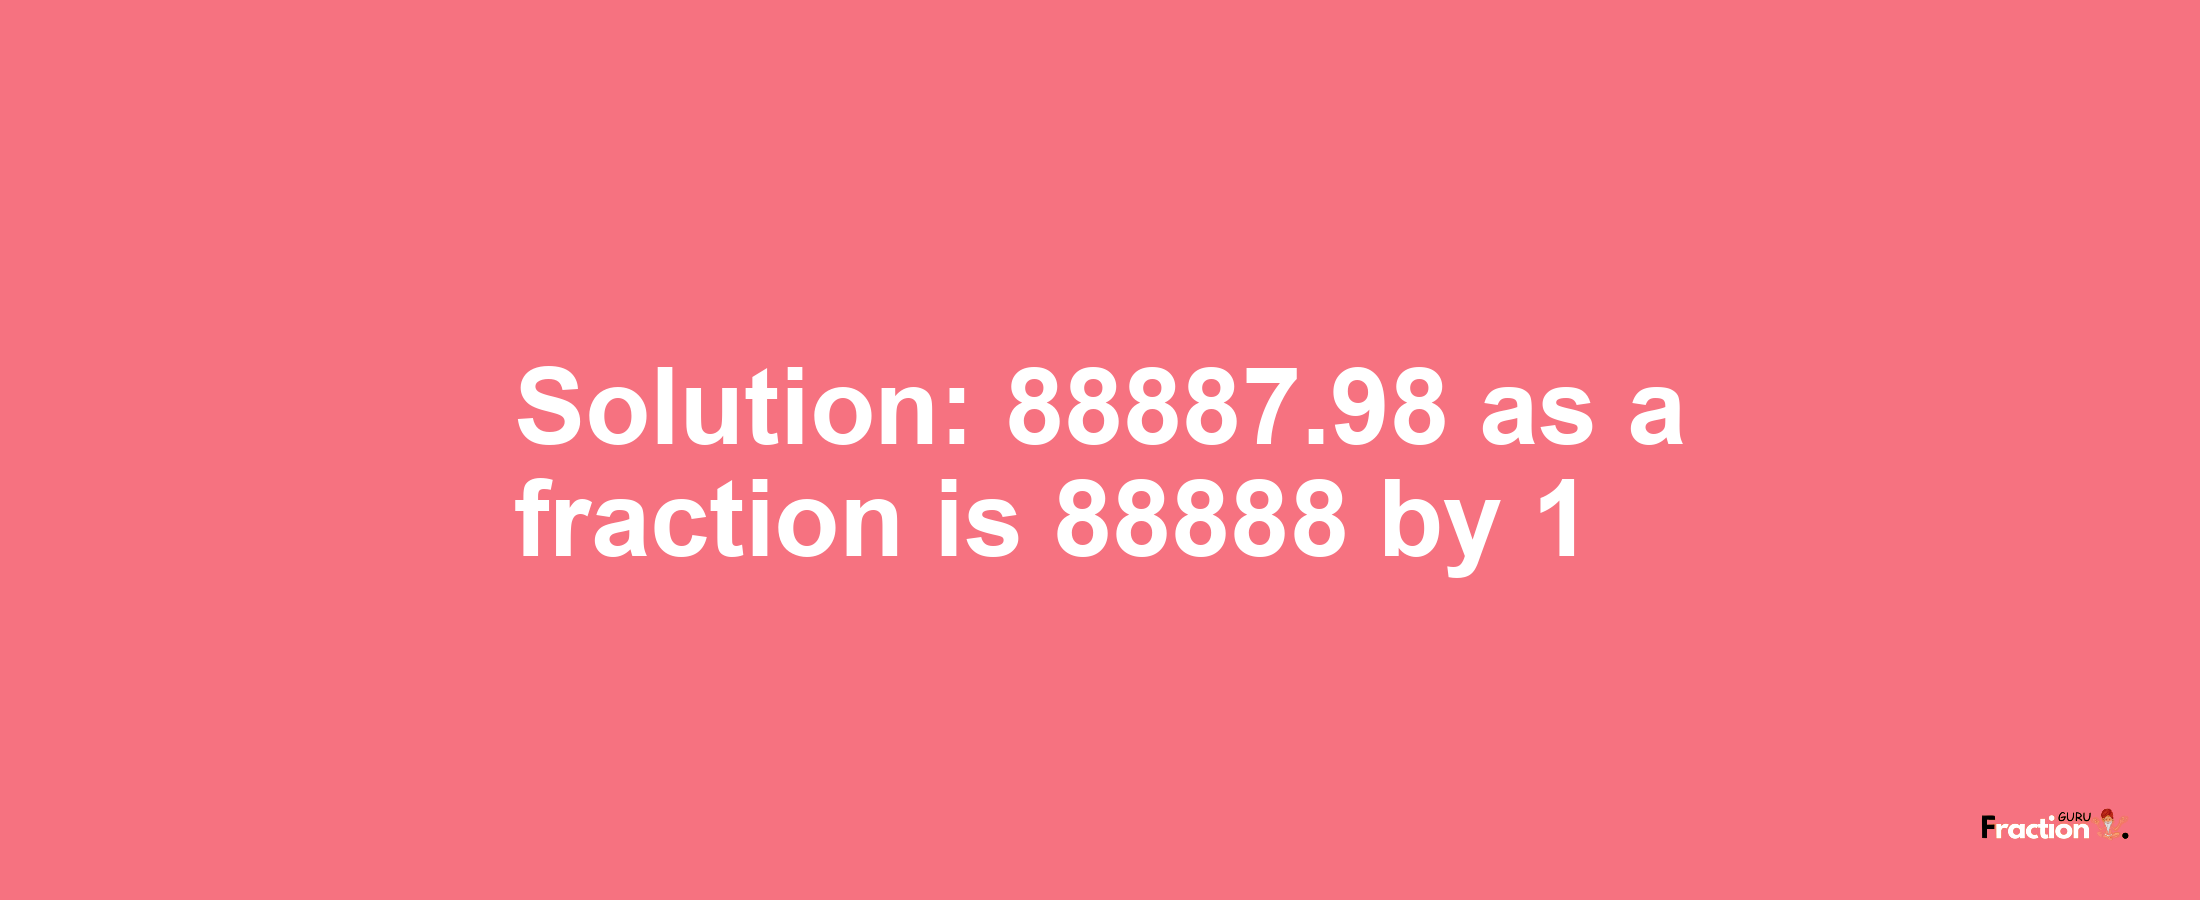 Solution:88887.98 as a fraction is 88888/1